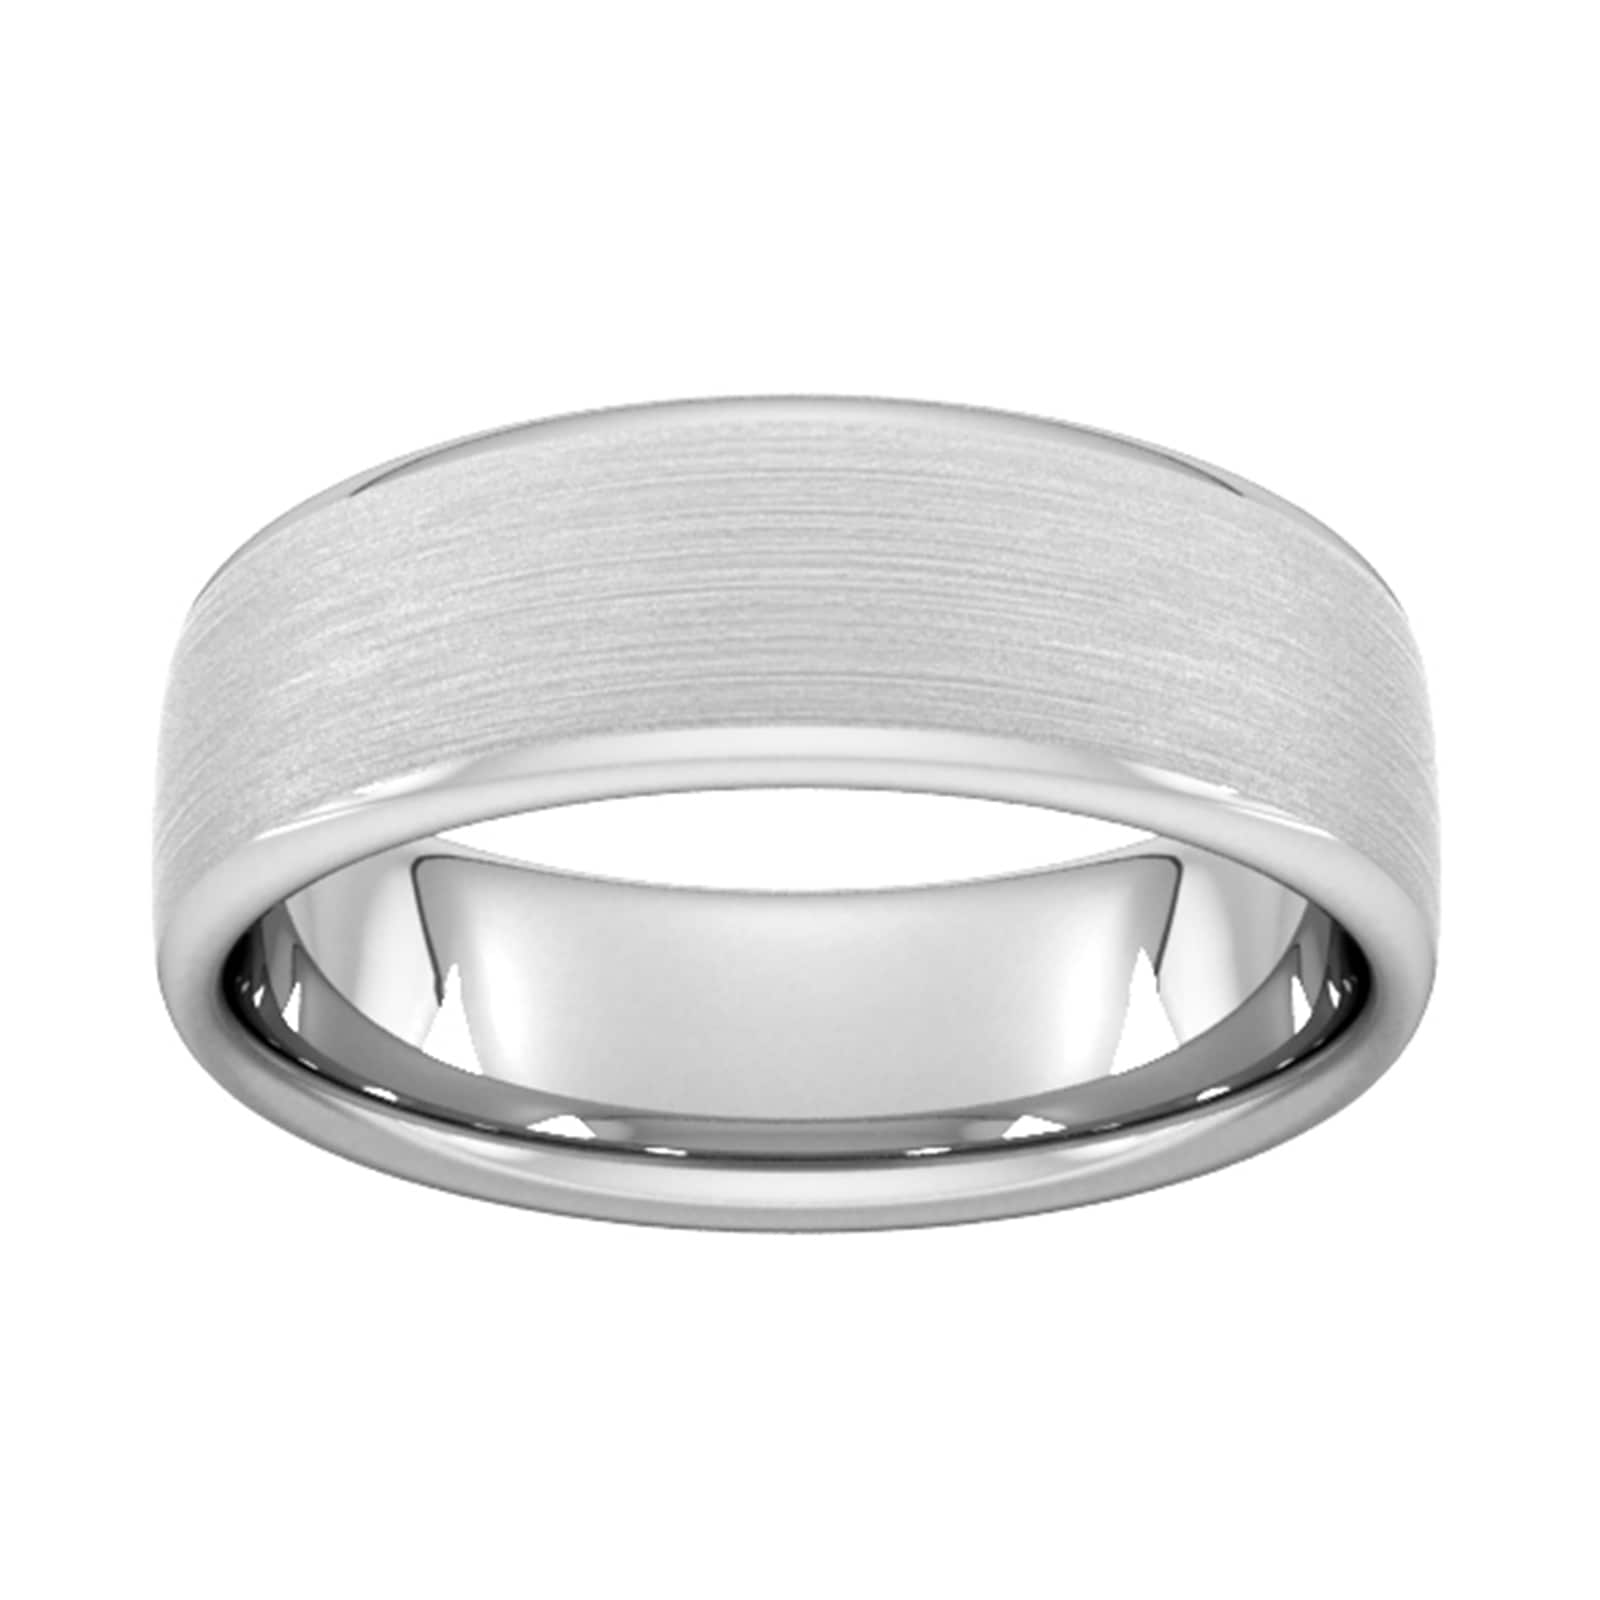 7mm Flat Court Heavy Matt Finished Wedding Ring In 9 Carat White Gold - Ring Size W